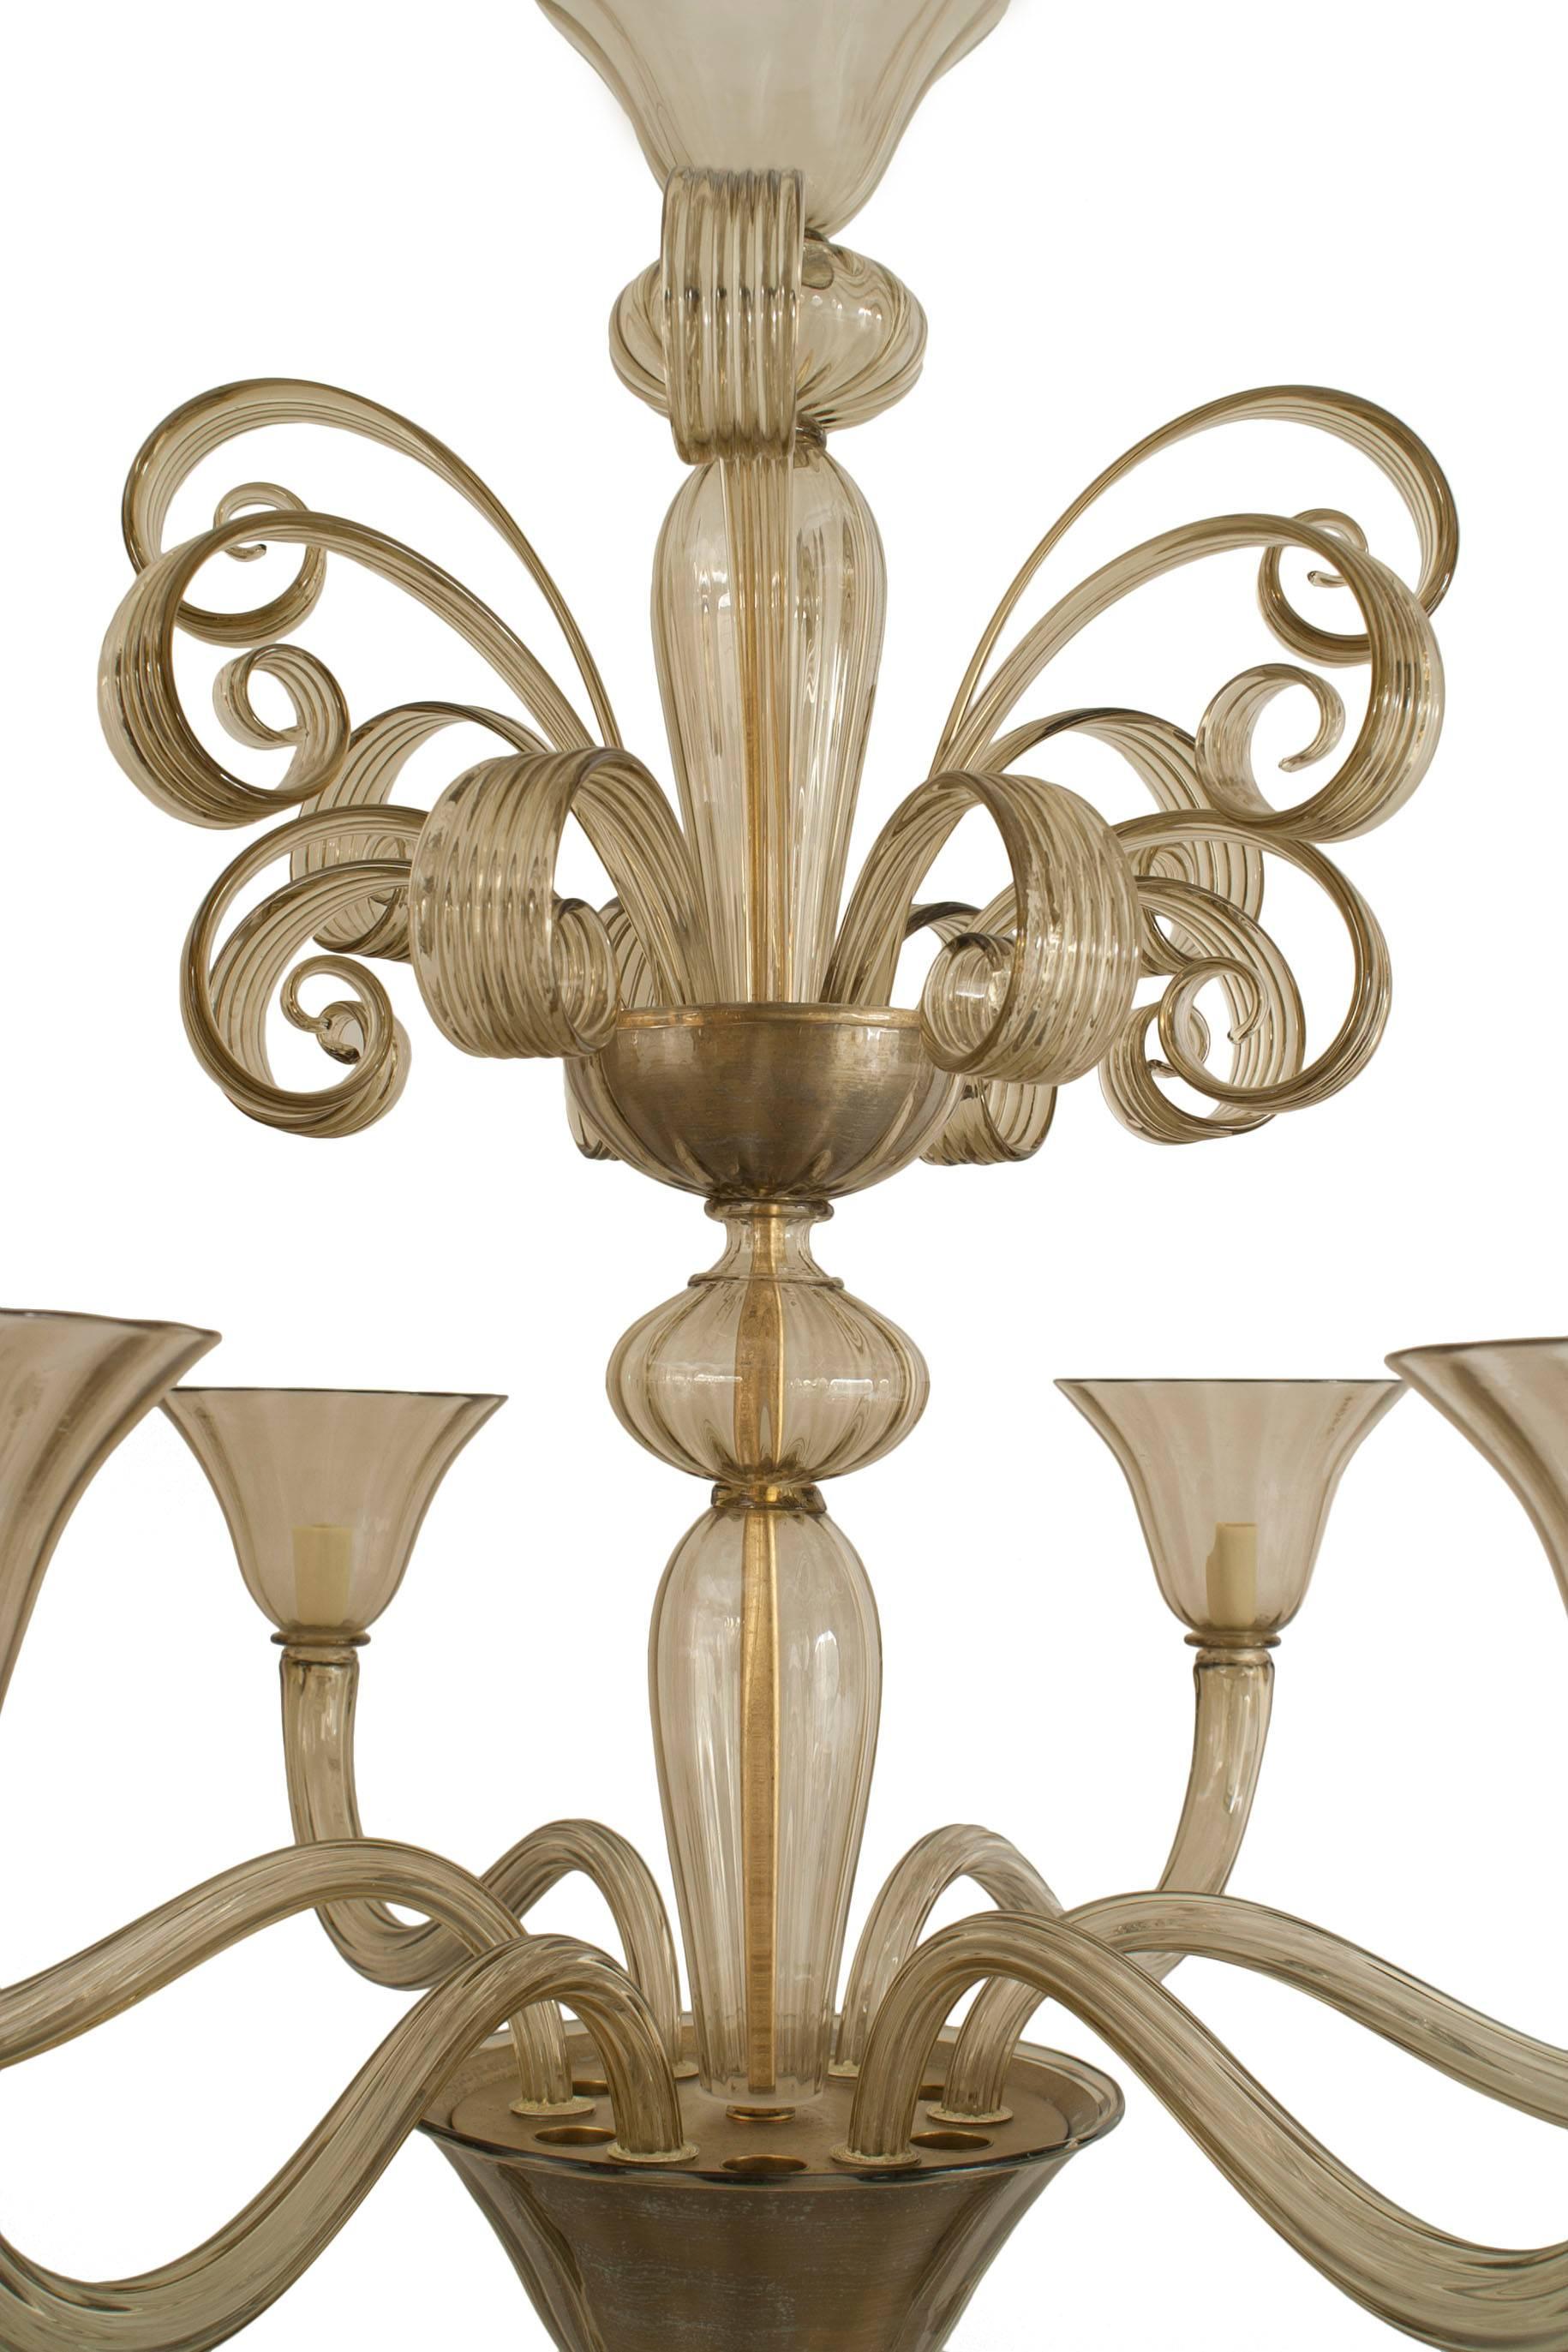 Italian Venetian Murano (1940s) style smoky glass chandelier with 6 fluted scroll arms holding tapered shades emanating from a centerpost having an upper tier of 3 tiers of 16 flat fluted scrolls with a finial bottom
